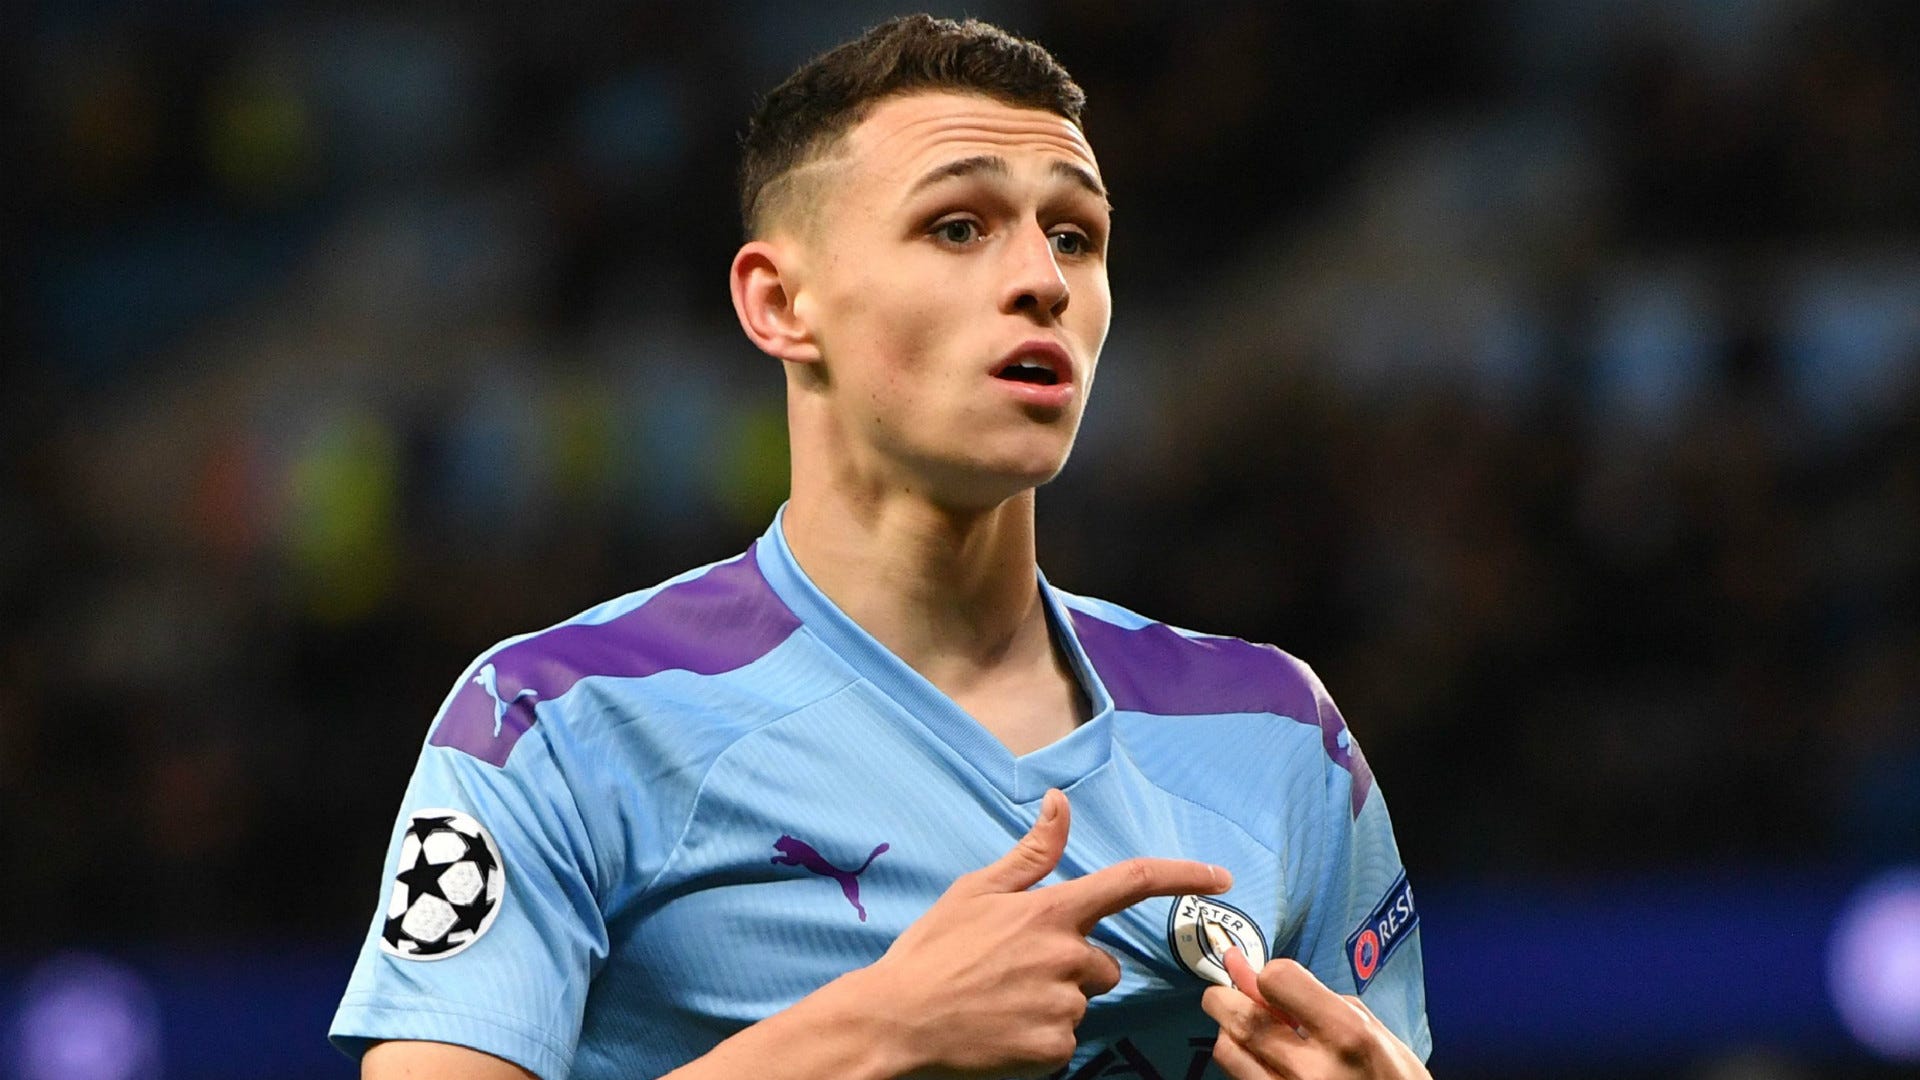 Phil Foden Manchester City 2019-20